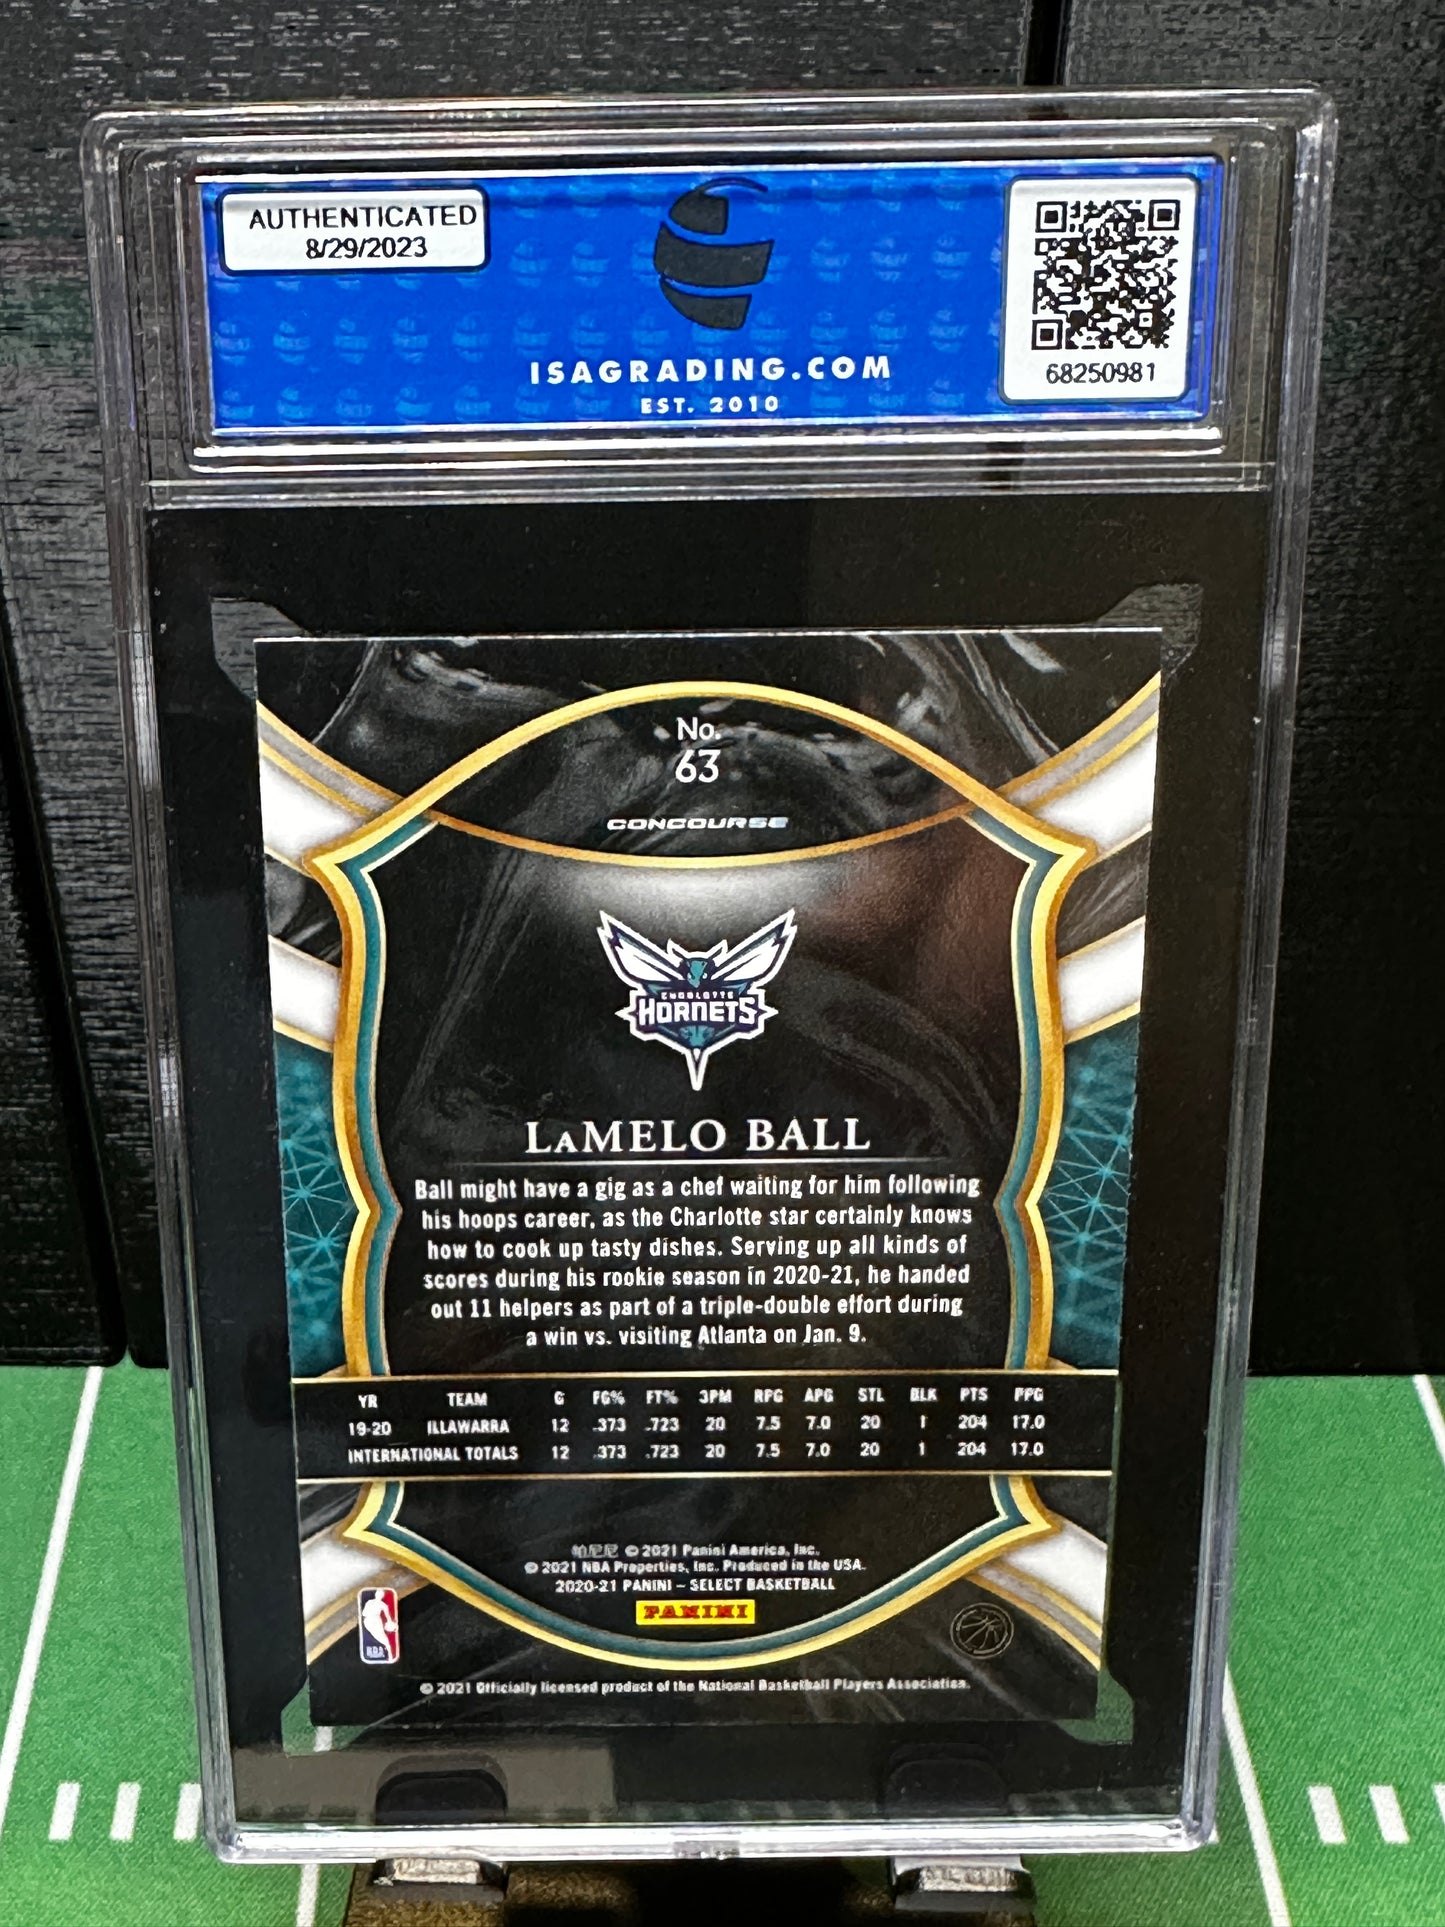 2020-21 Panini Select Concourse Lamelo Ball RC Blue Retail Silver Prizm #63 ISA 9